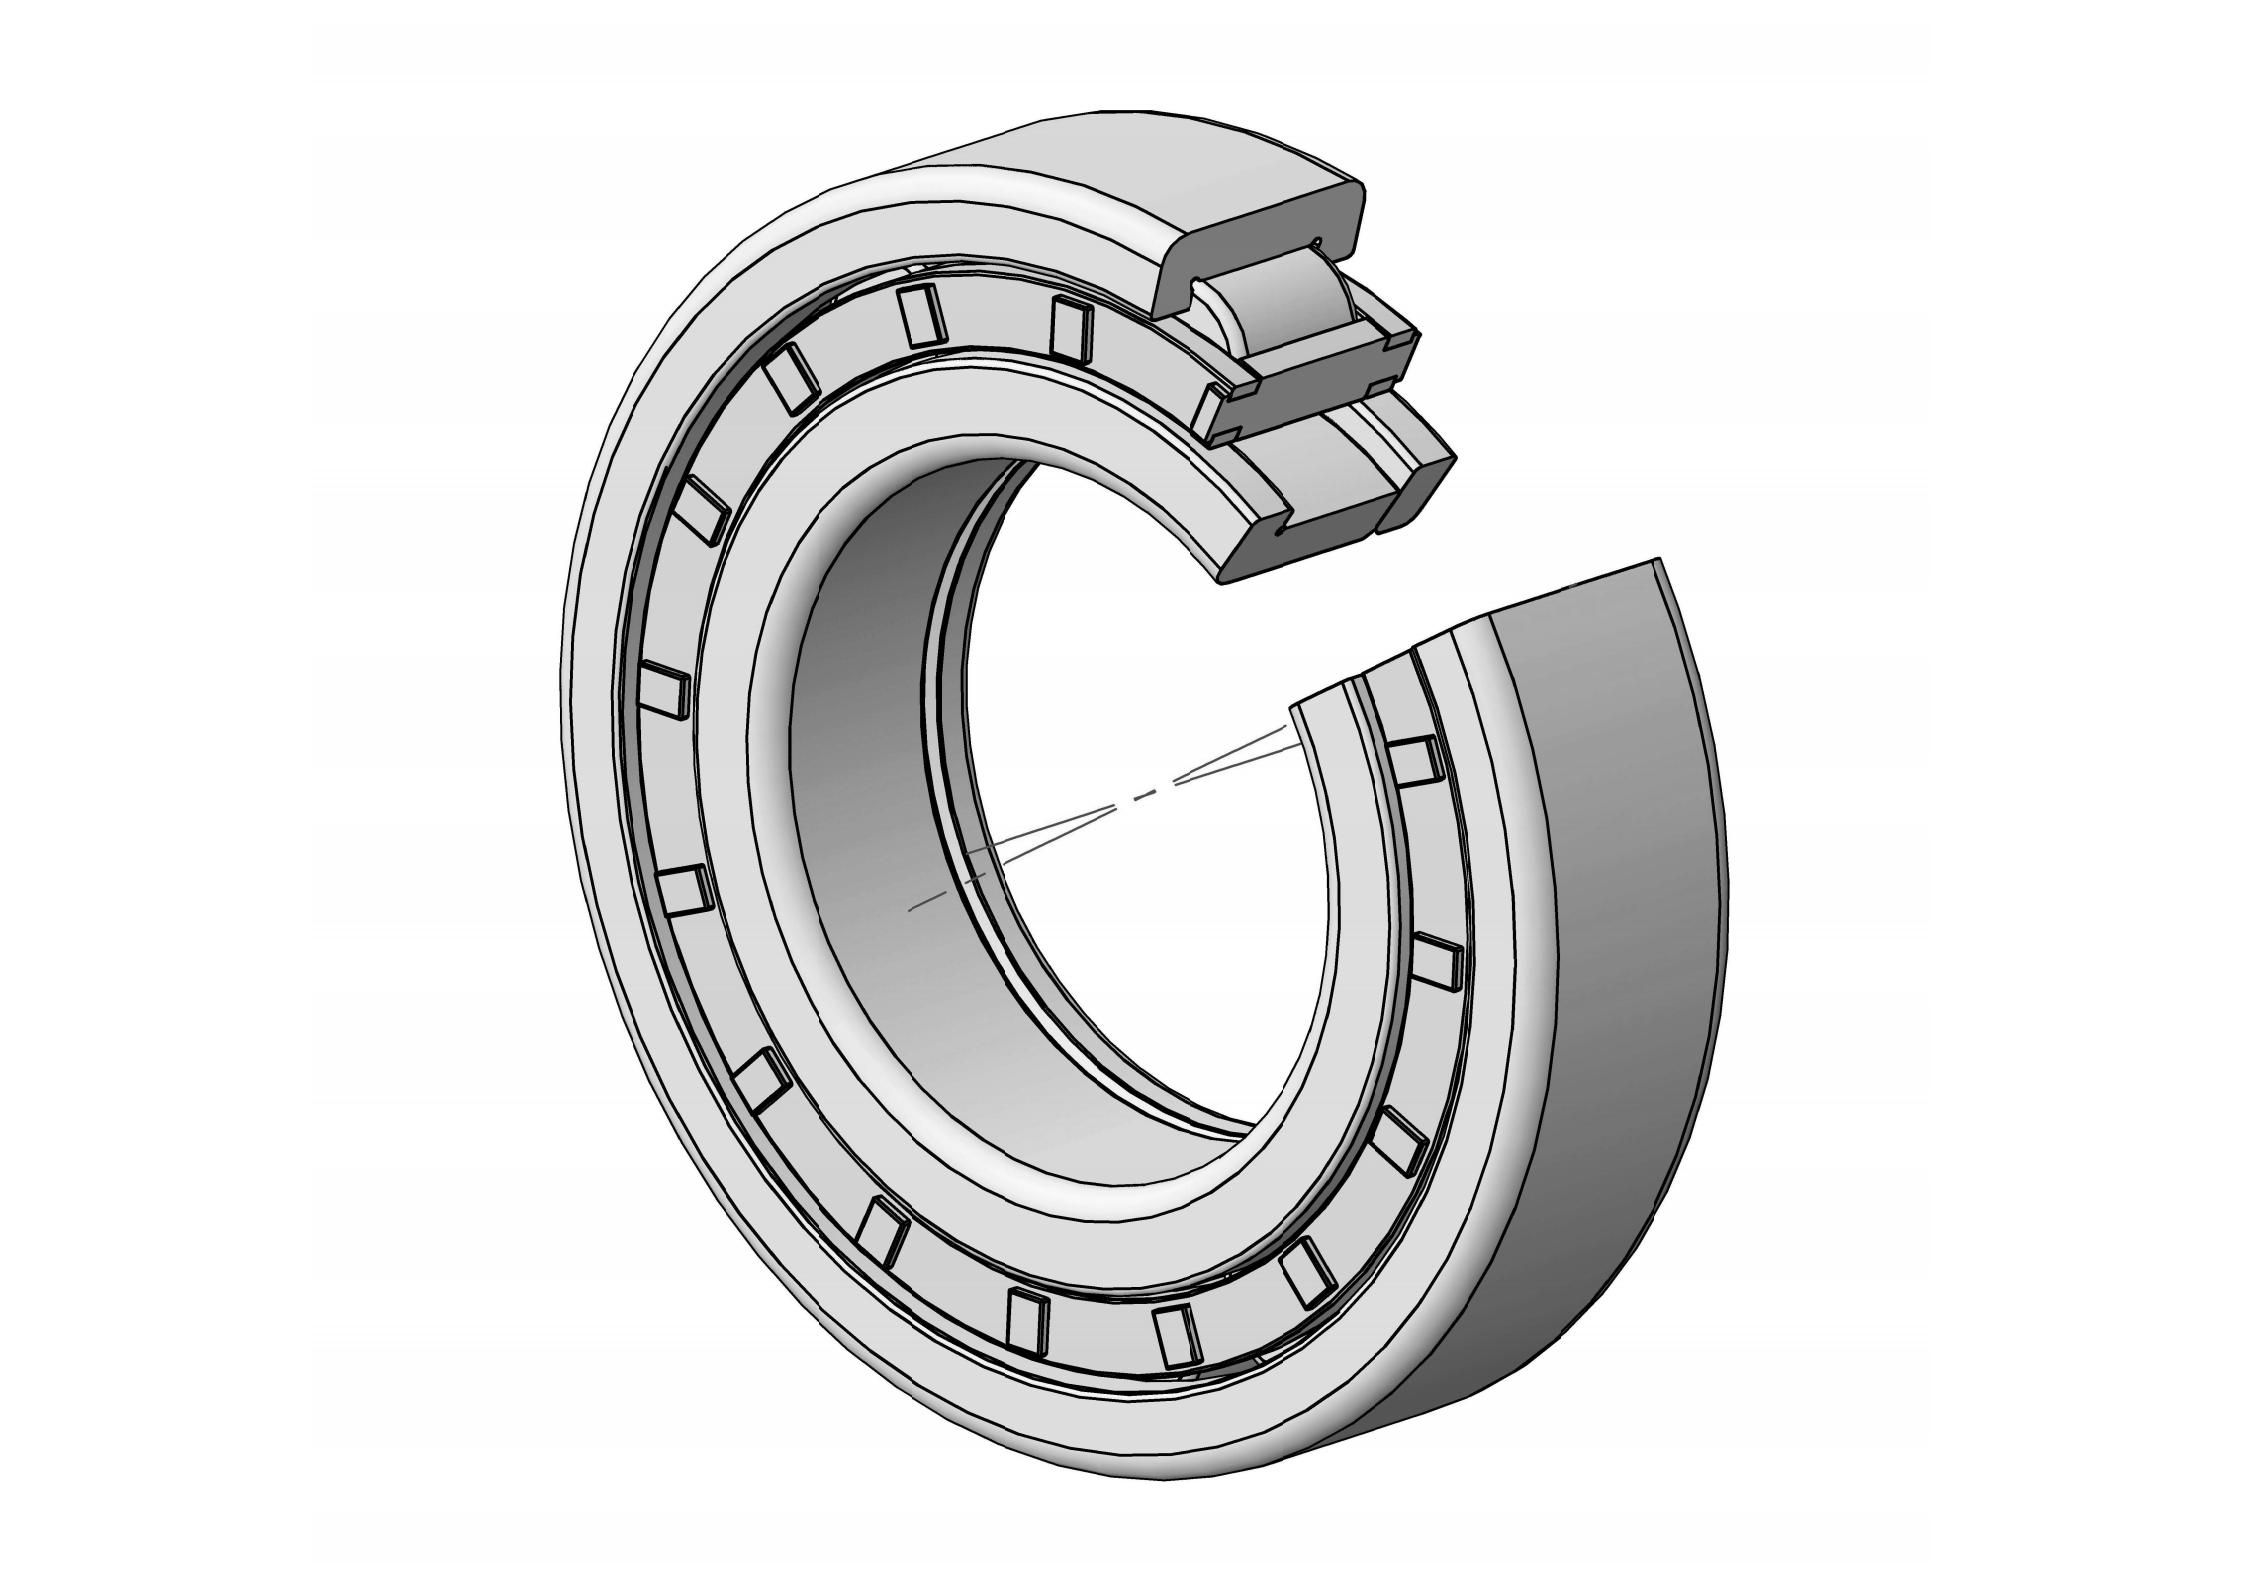 NUP2315-E Single Row Cylindrical roller bearing